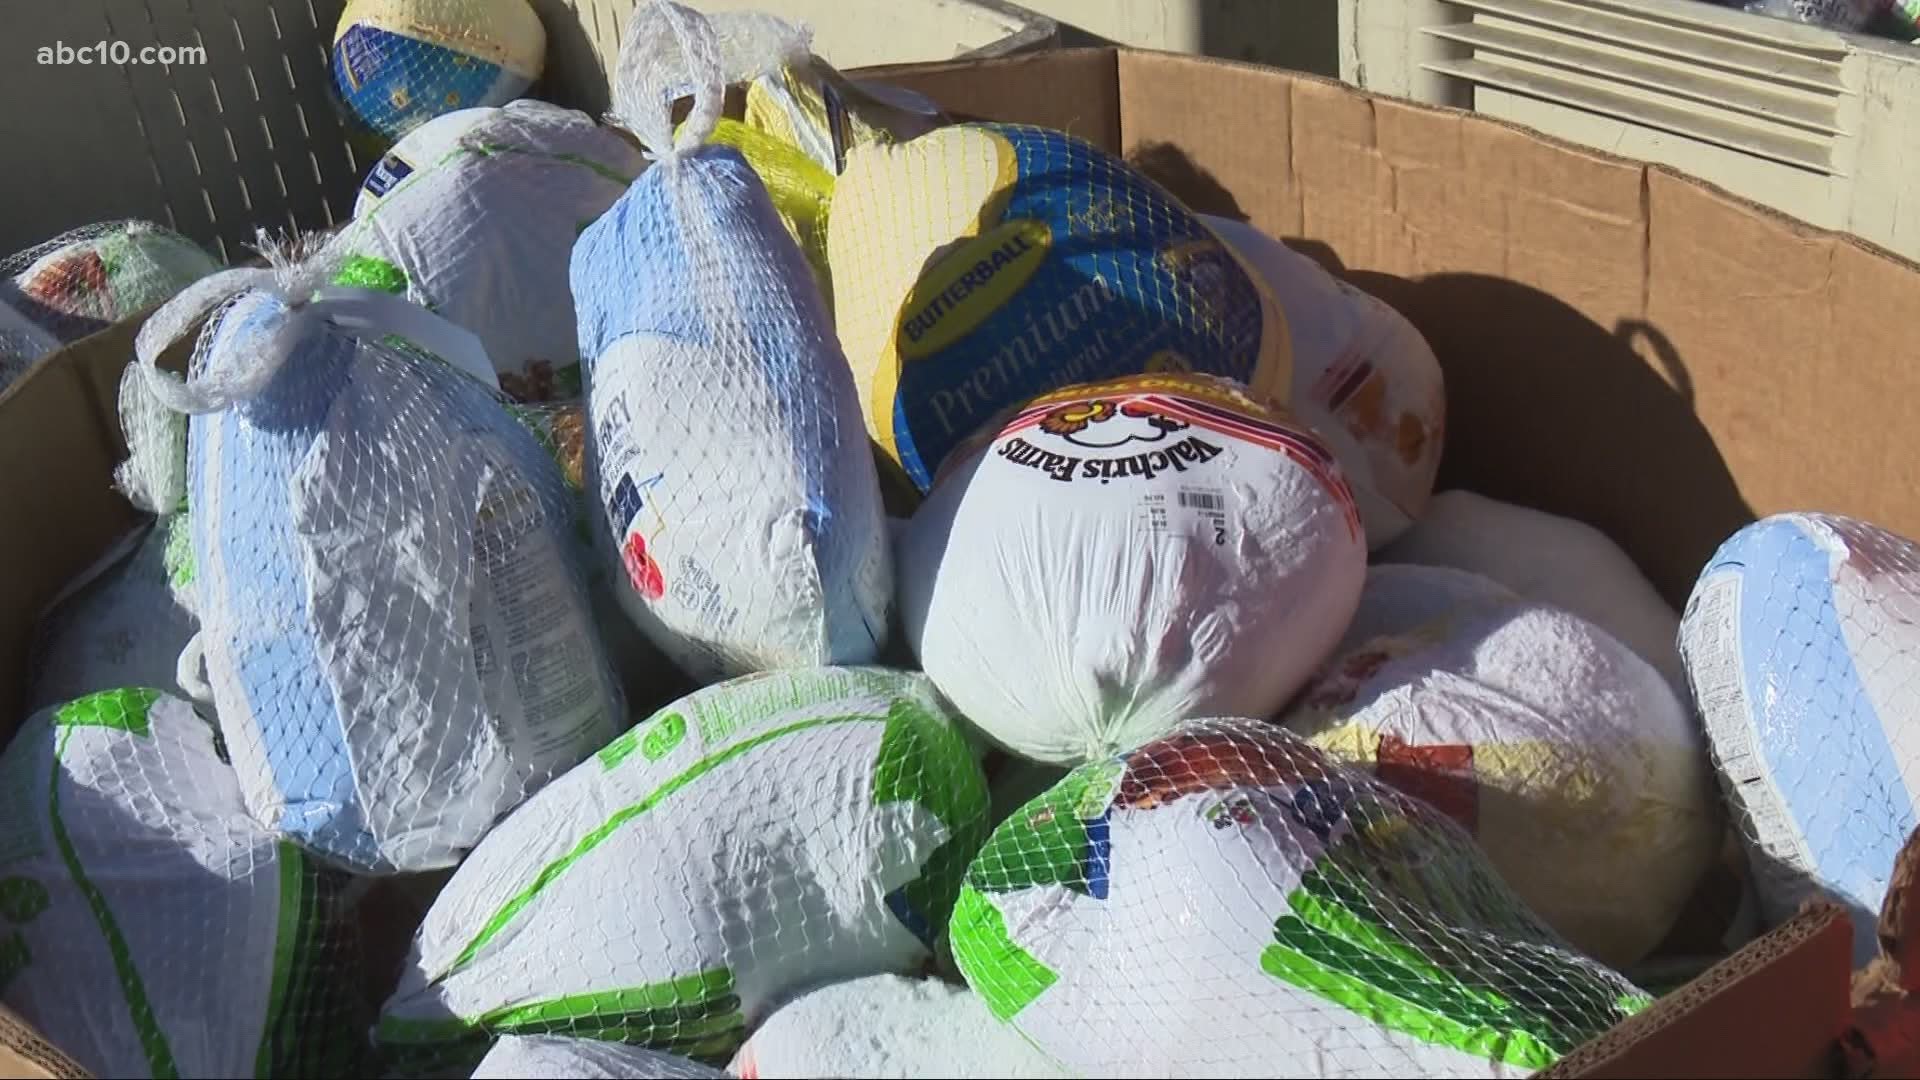 So far, the Stockton Emergency Food Bank has given away 2,700 turkeys, which is 500 more than last year as more people are unemployed due to the pandemic.